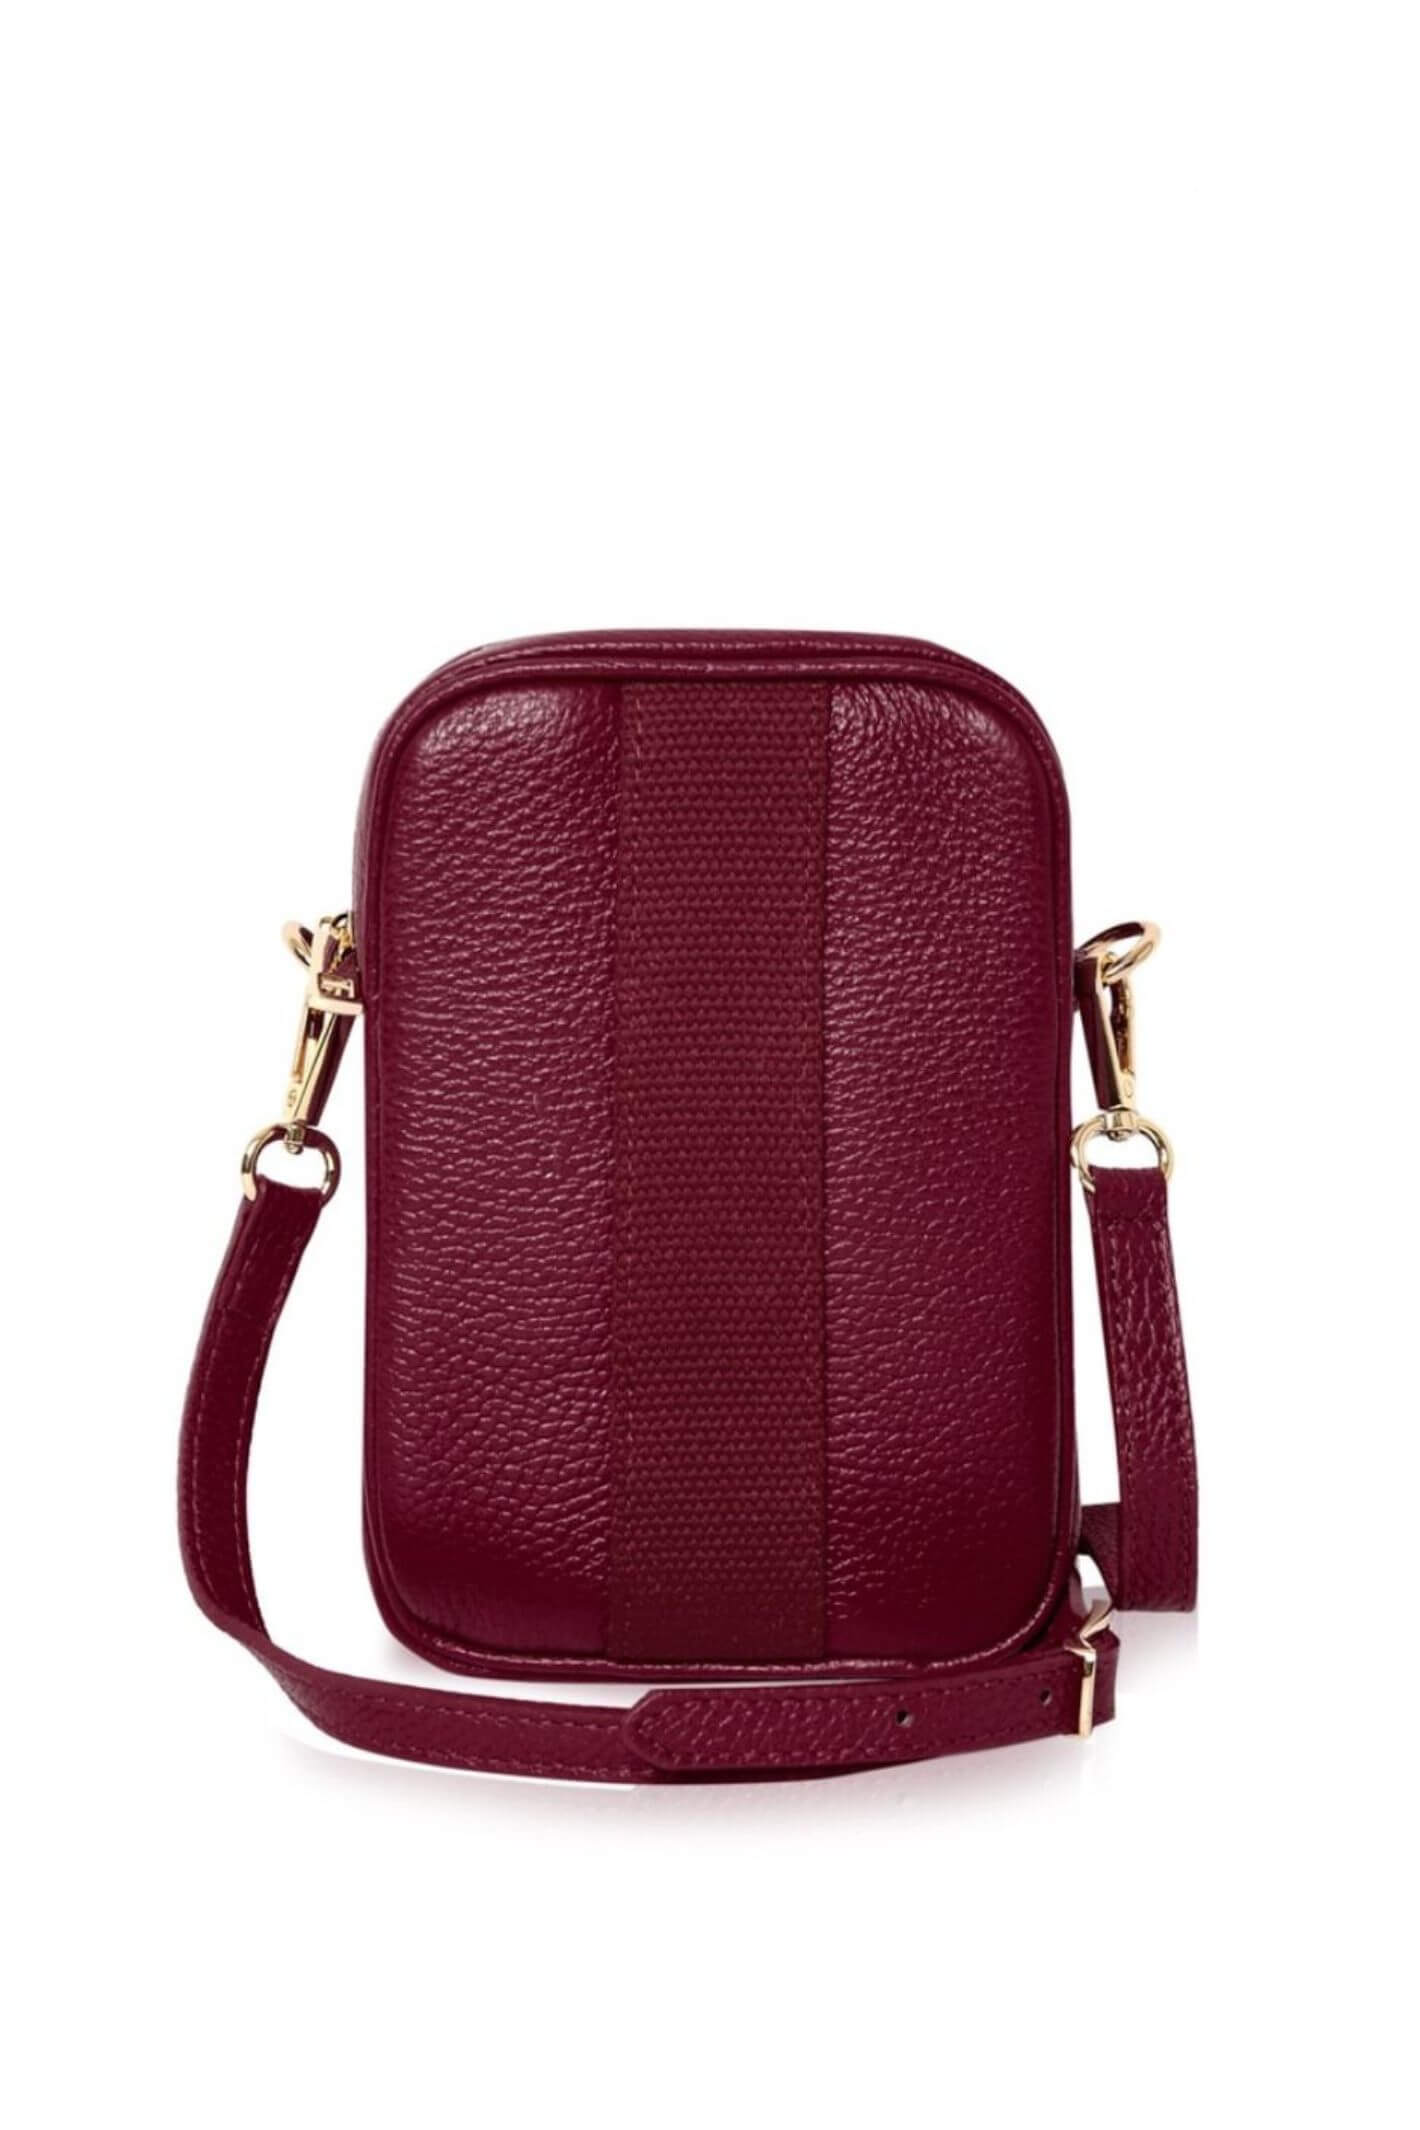 Burgundy Leather Canvas Detail Cross Body Phone Bag – Experience